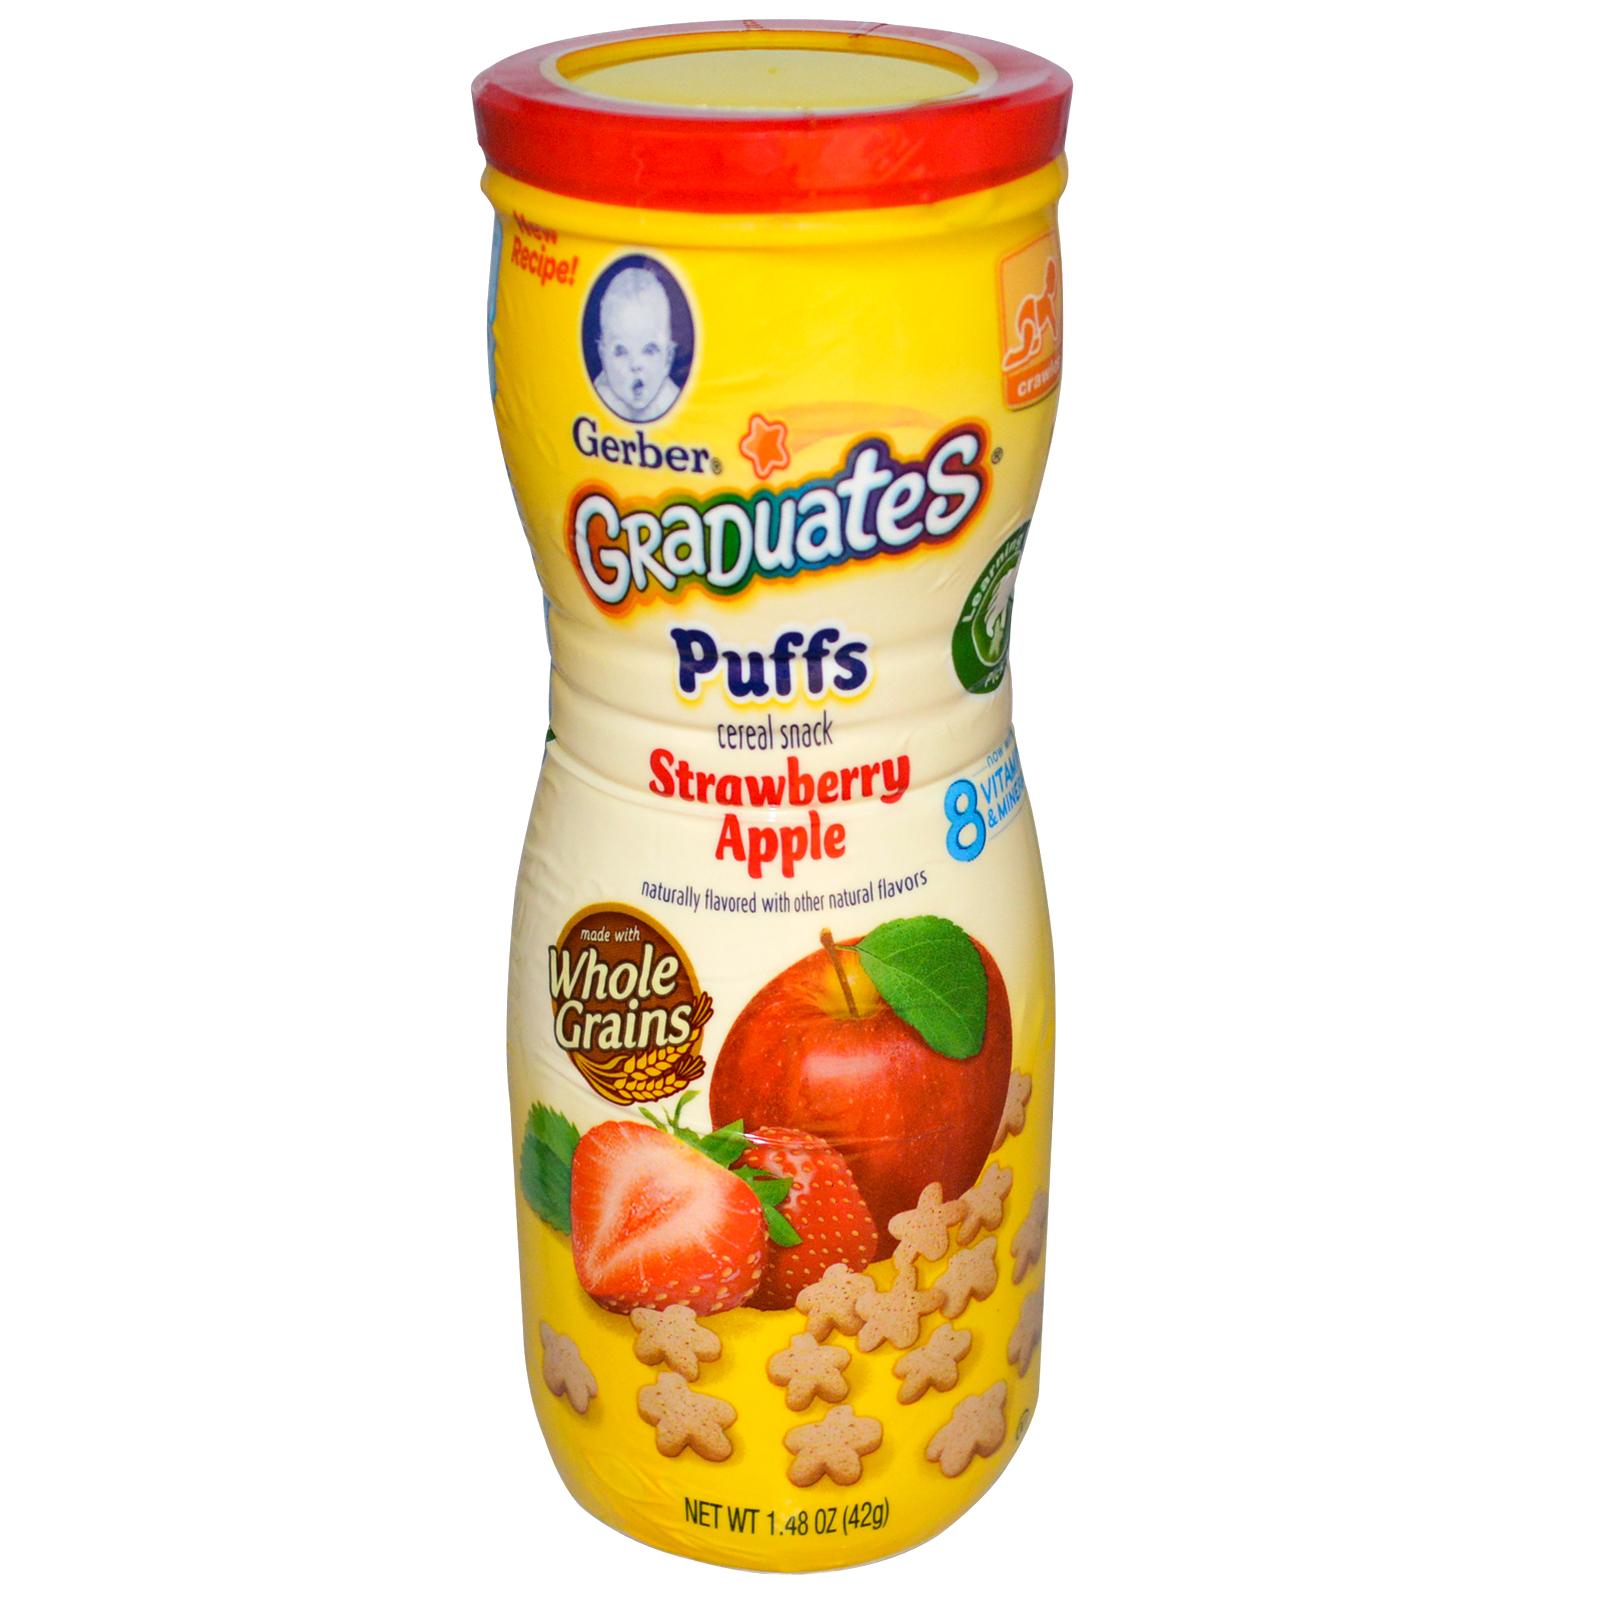 Gerber Graduates Puffs, 1.48-Ounce Canisters (Pack of 6)   $10.60